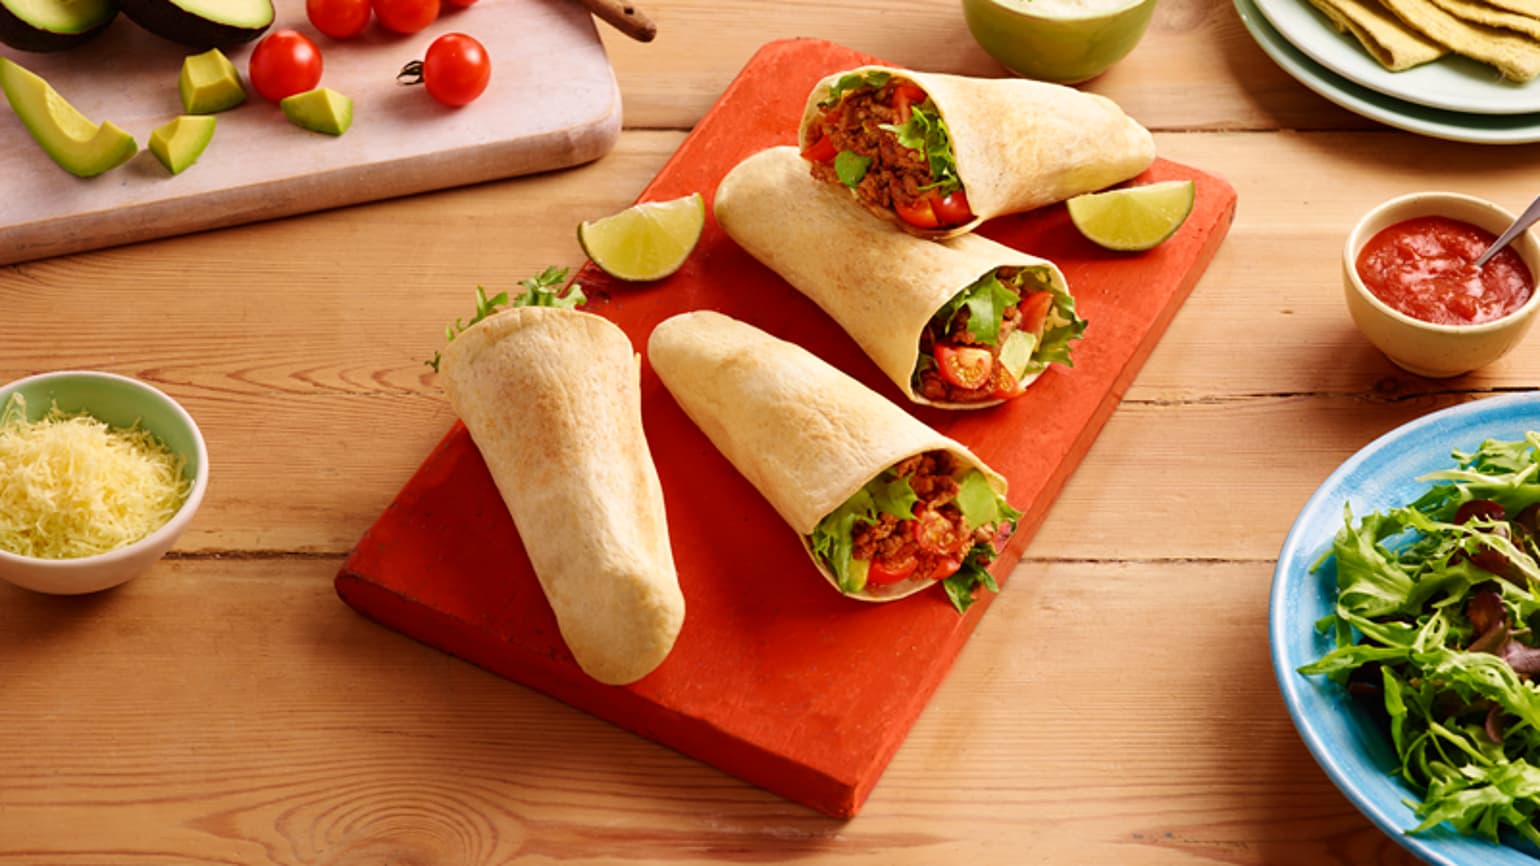 Classic tortilla pockets with beef